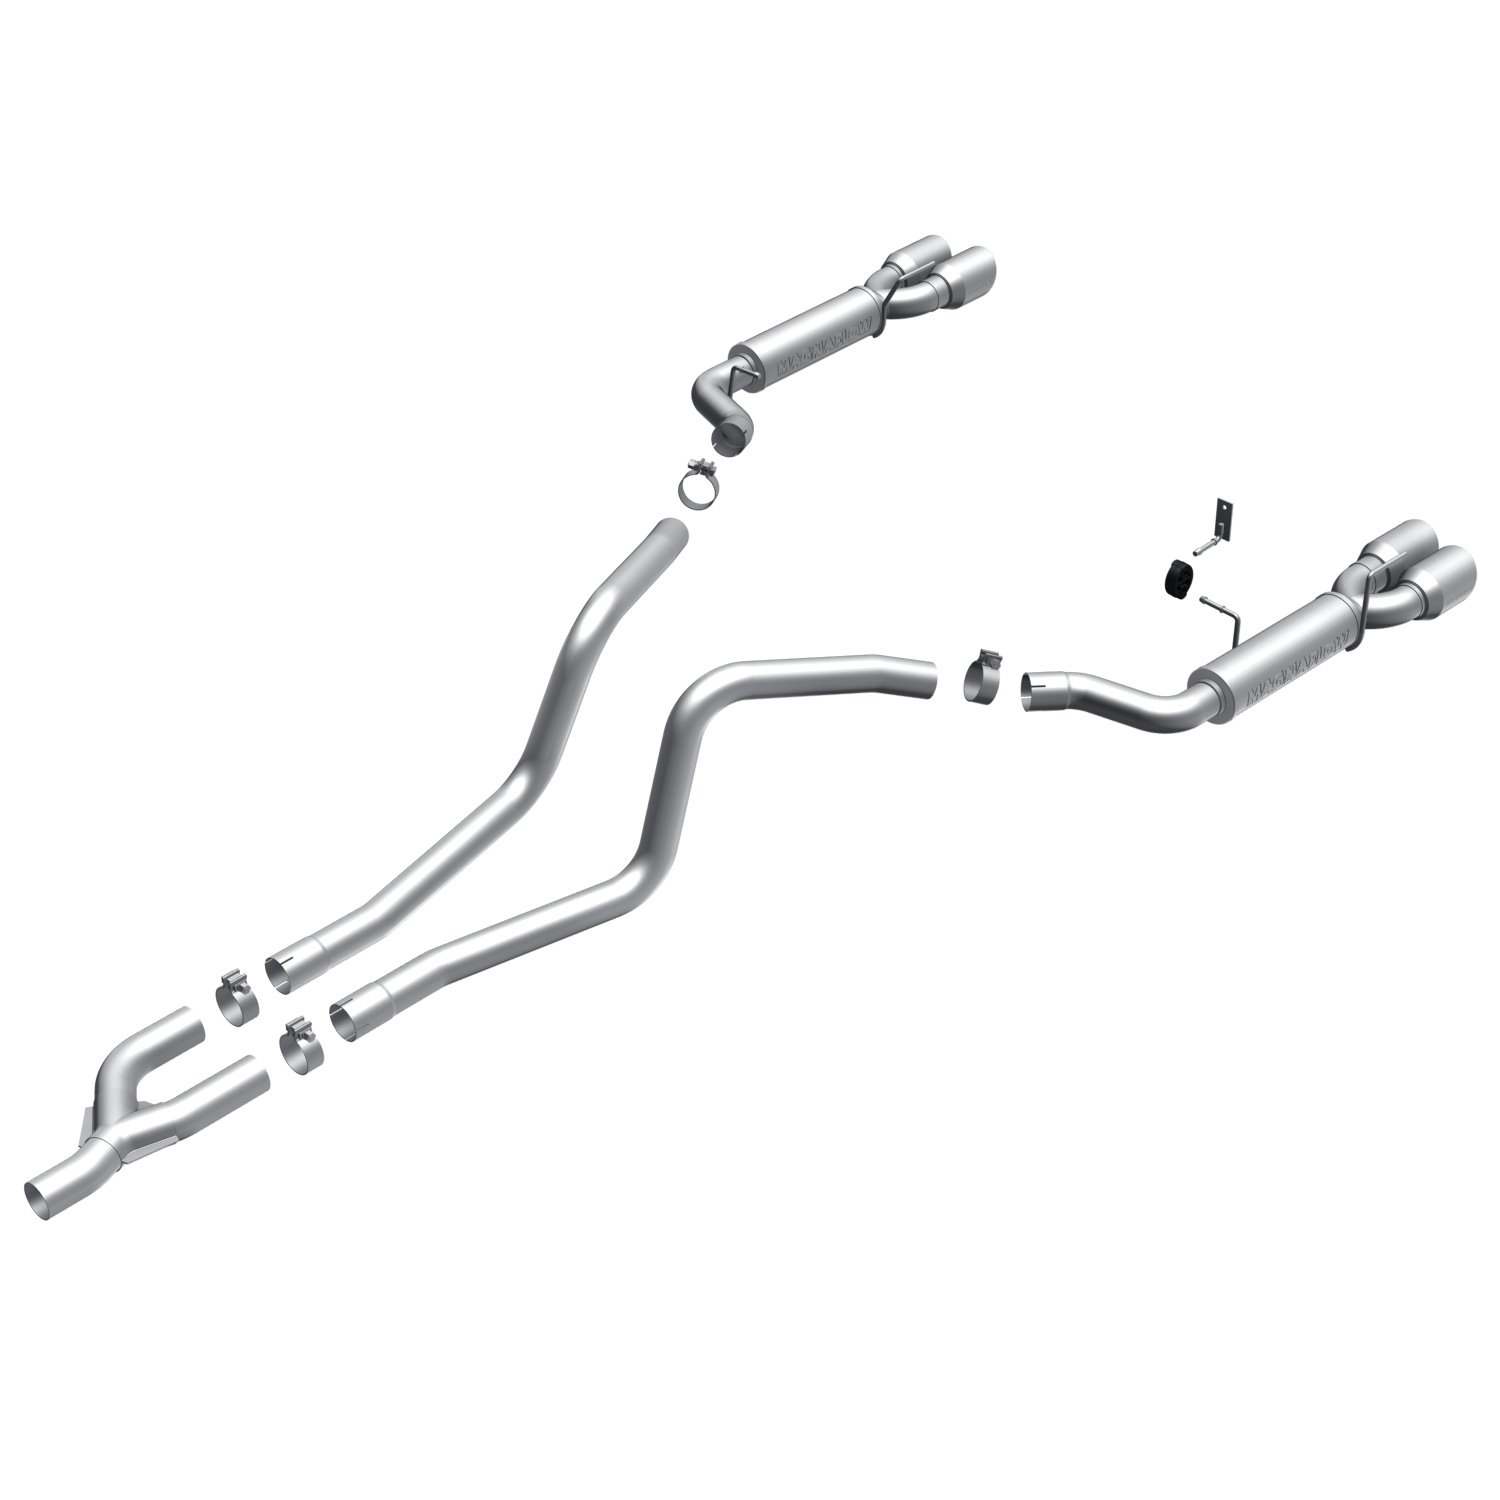 Competition Series Cat-Back Exhaust System 2010 Mustang 4.0L V6